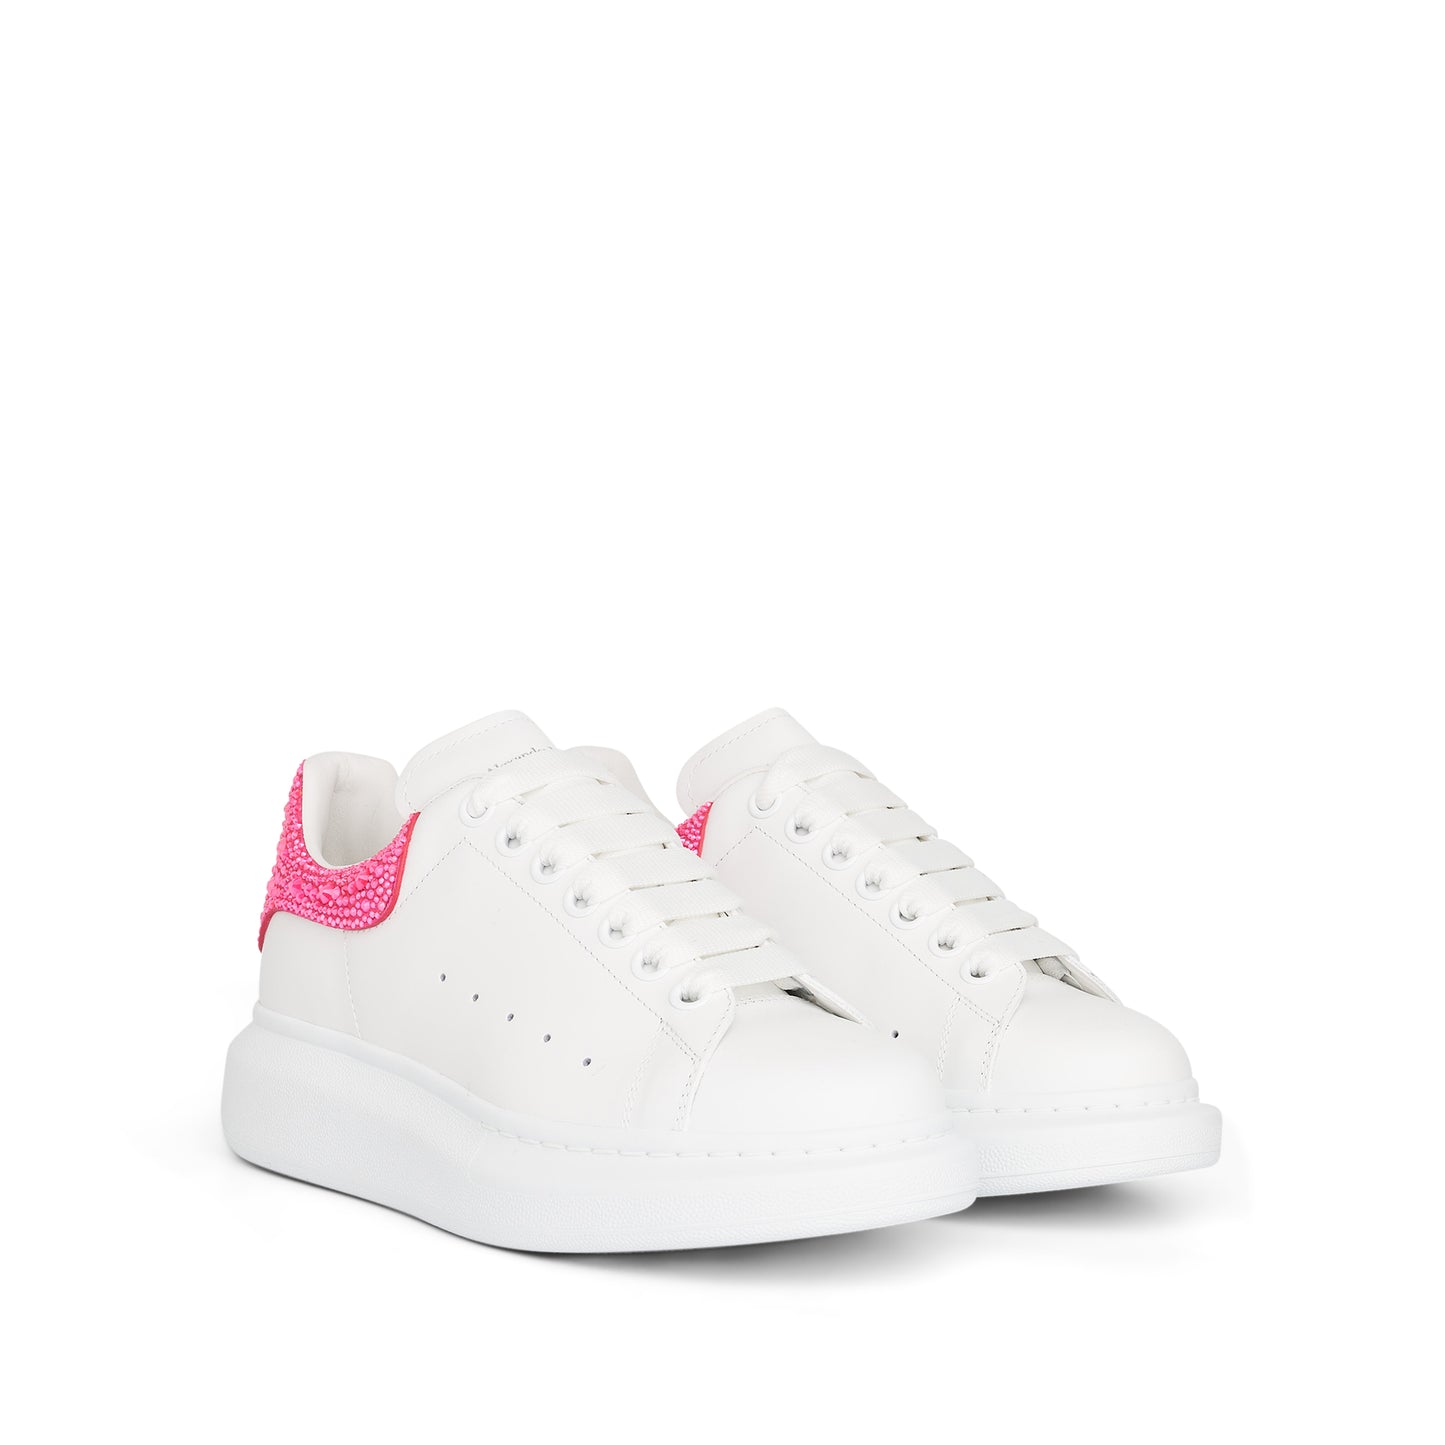 Larry Oversized Suede Sneaker in White/Halo Pink